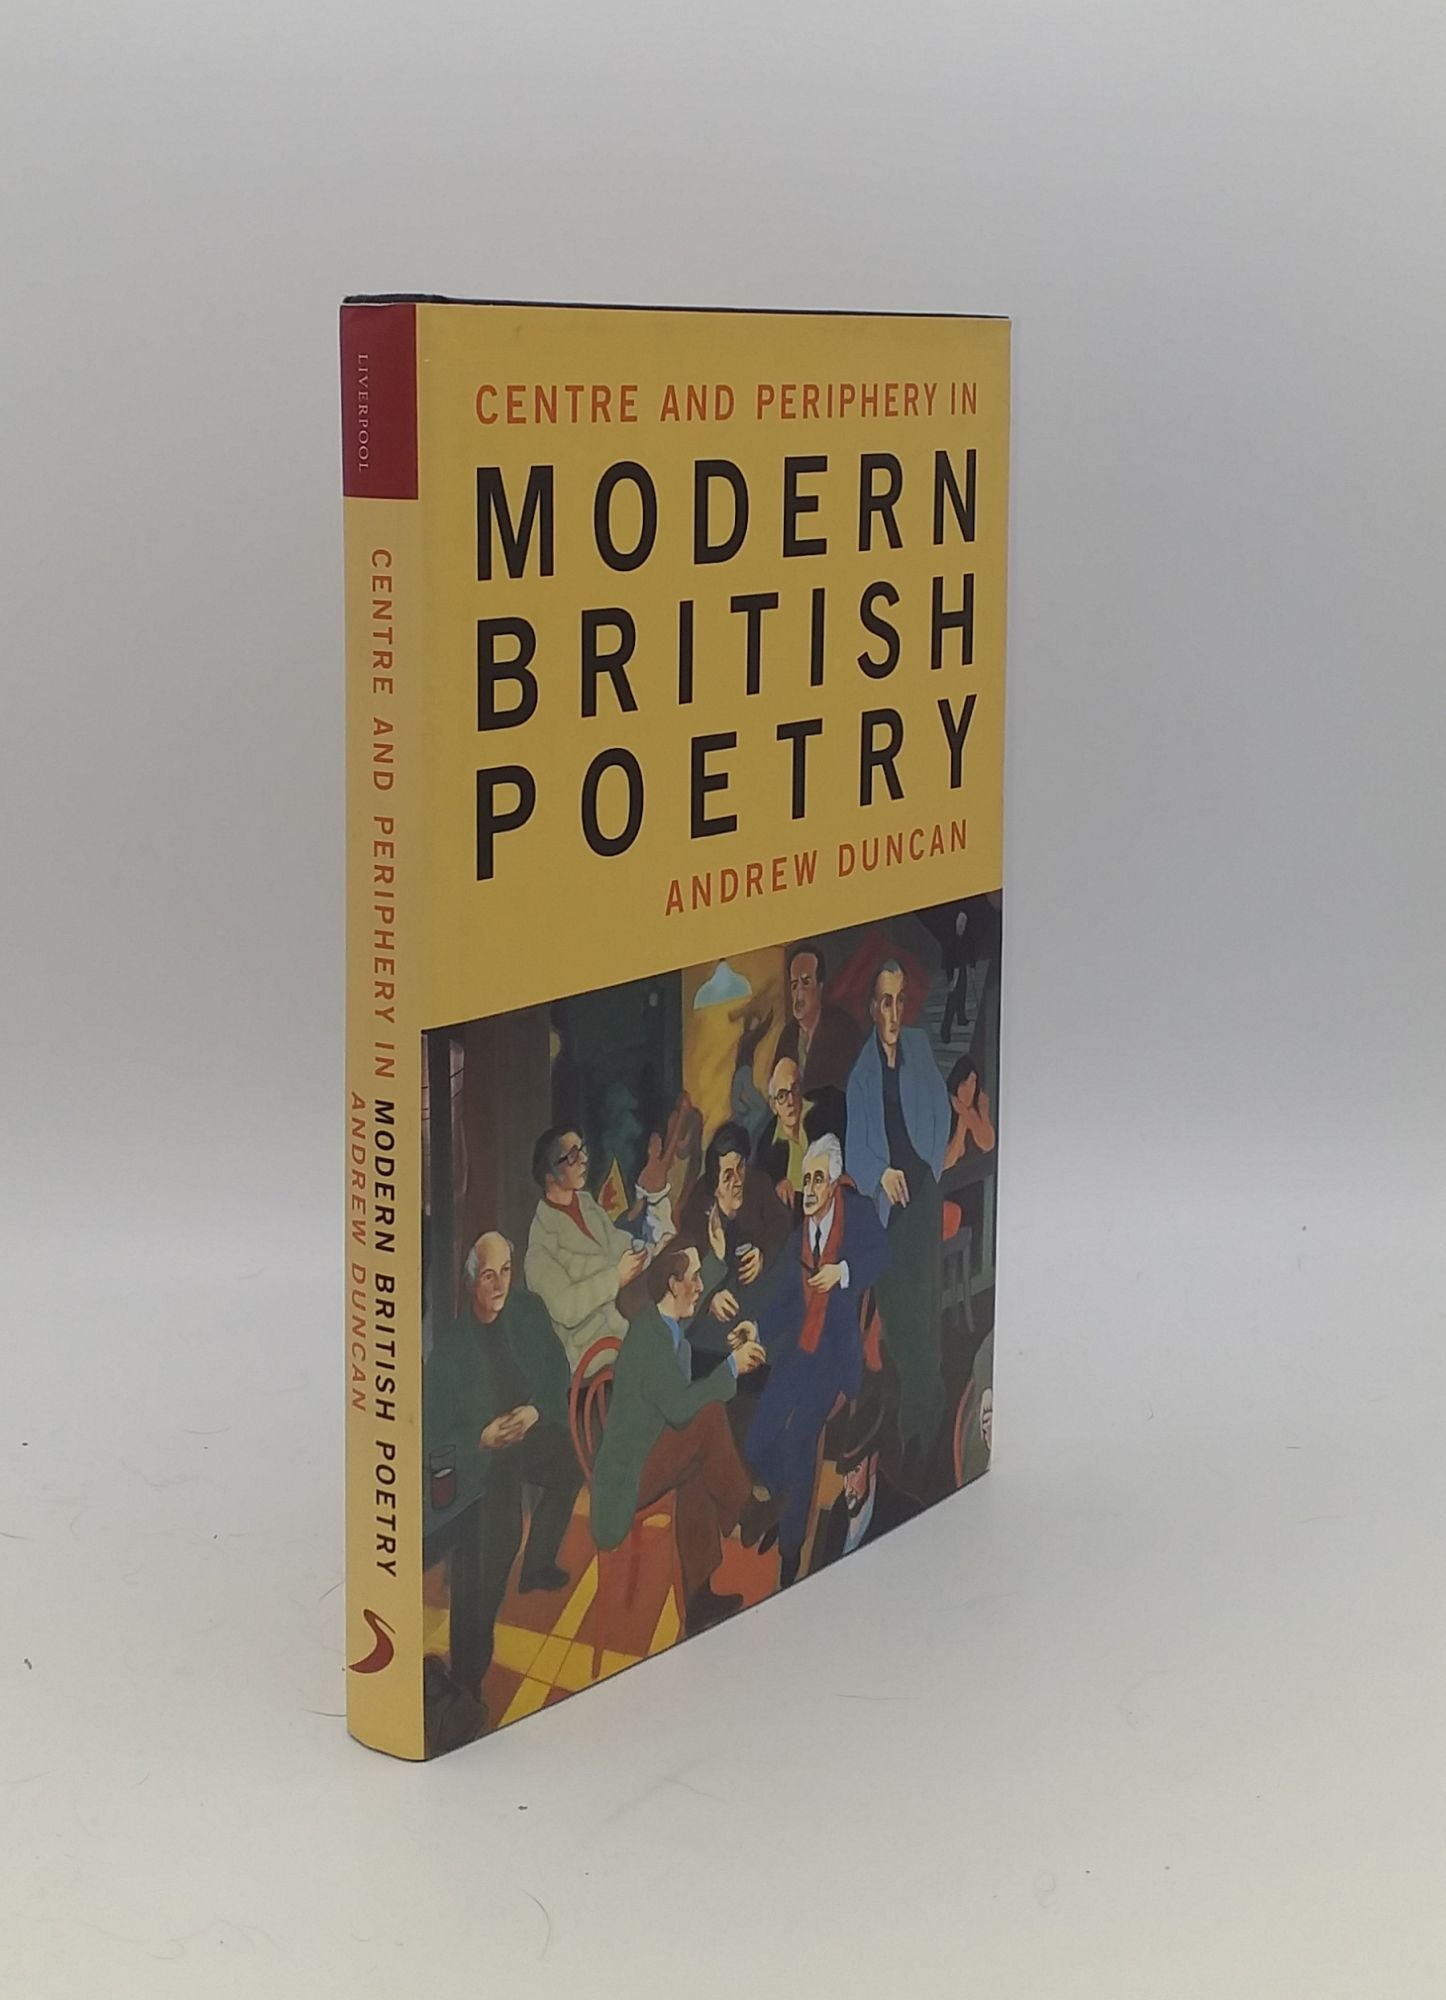 DUNCAN Andrew - Centre and Periphery in Modern British Poetry